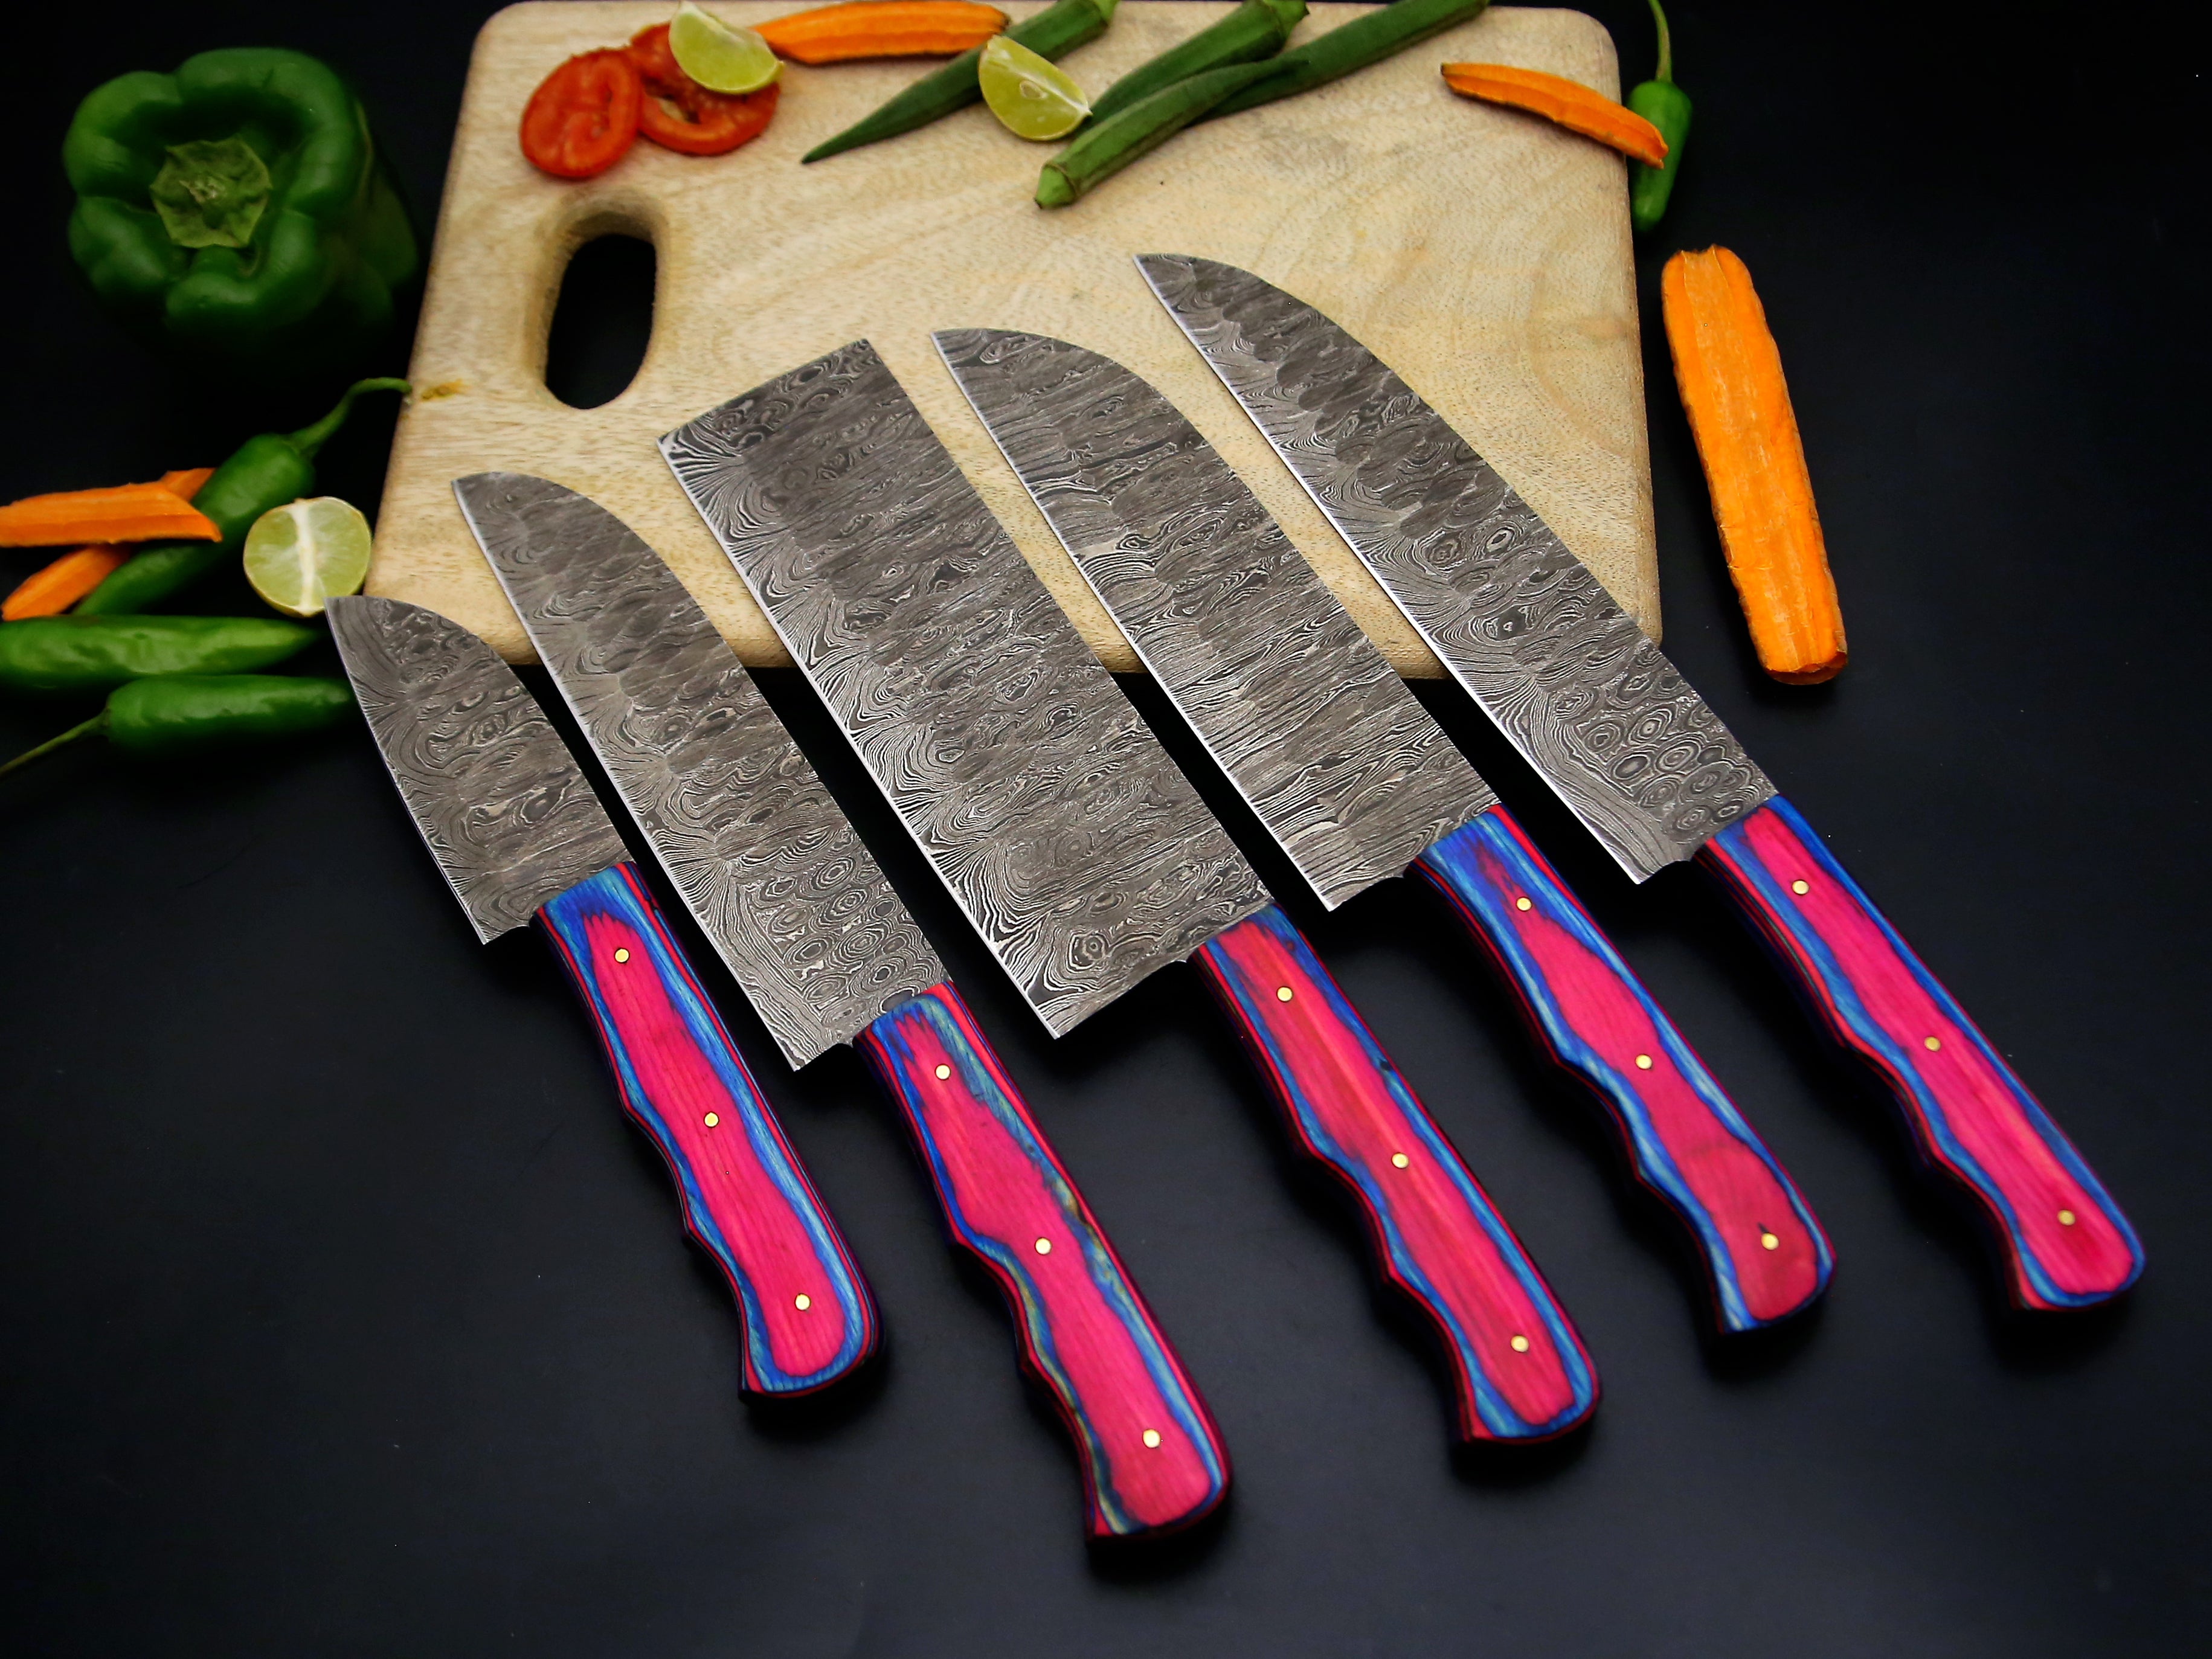 Personalized Handmade Damascus Steel Kitchen Knife Set Of 5 PCS Multi Color Dollar Handle Chef Knife With Leather Roll Kit.